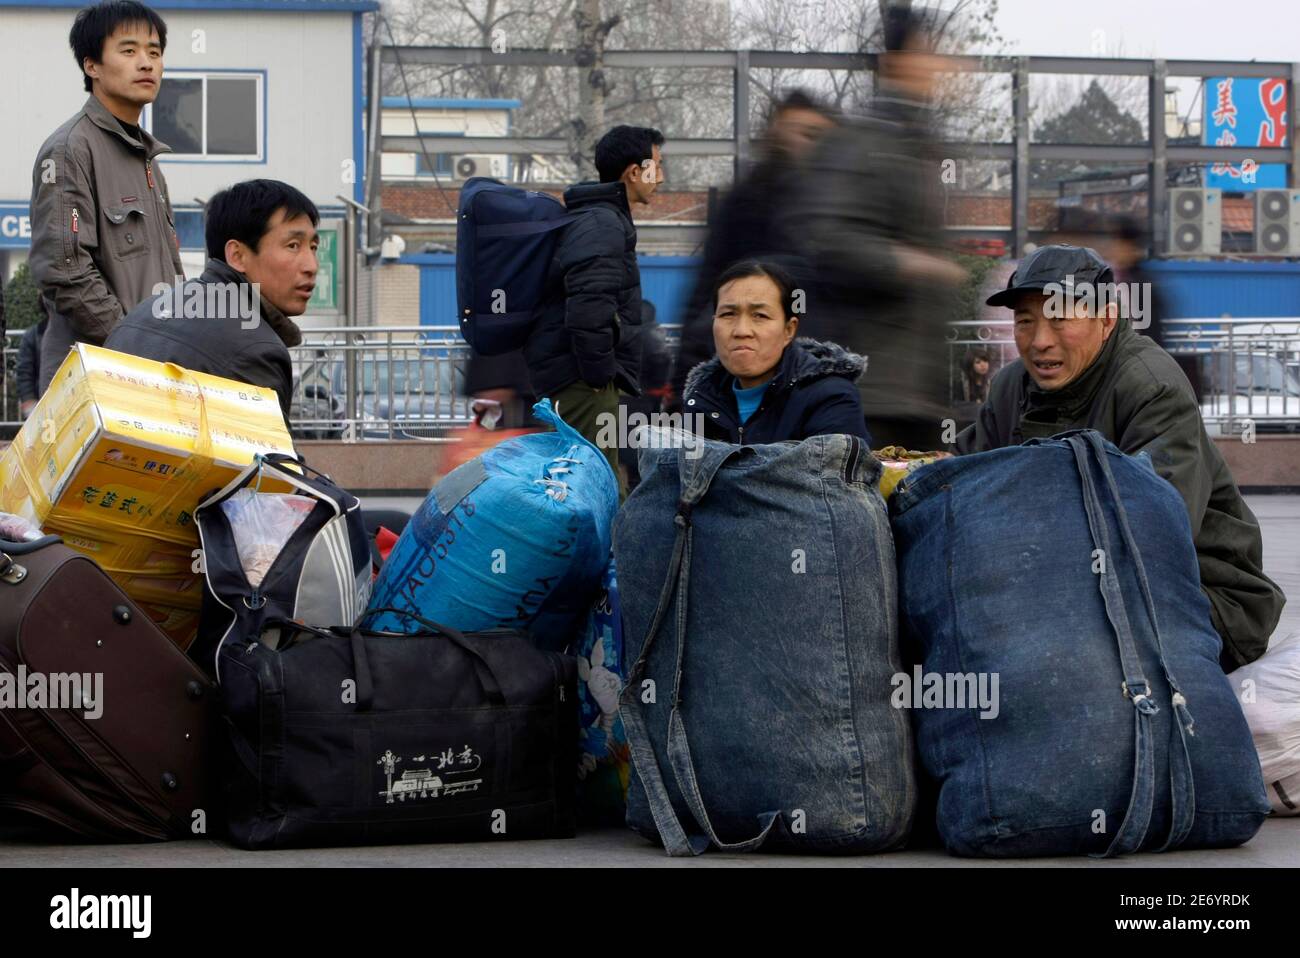 Migrant workers sit next to their baggage as they wait to go back home at Beijing Railway Station December 9, 2008. China's job market will weaken to a two-year low in the first quarter of 2009 as the global financial crisis takes its toll, Manpower Inc said in a survey released on Tuesday. REUTERS/Jason Lee (CHINA) Stock Photo